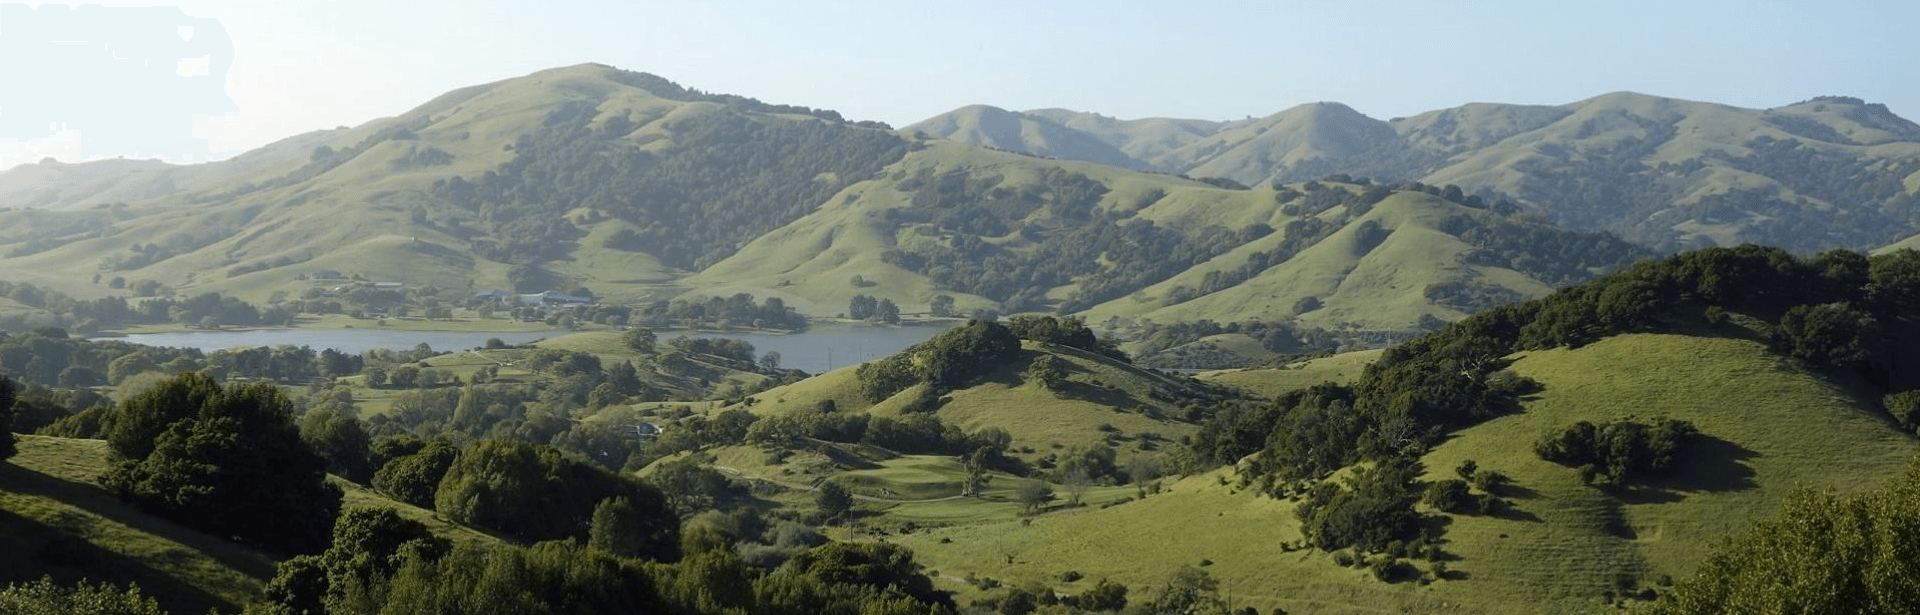 Green hills in Marin County.